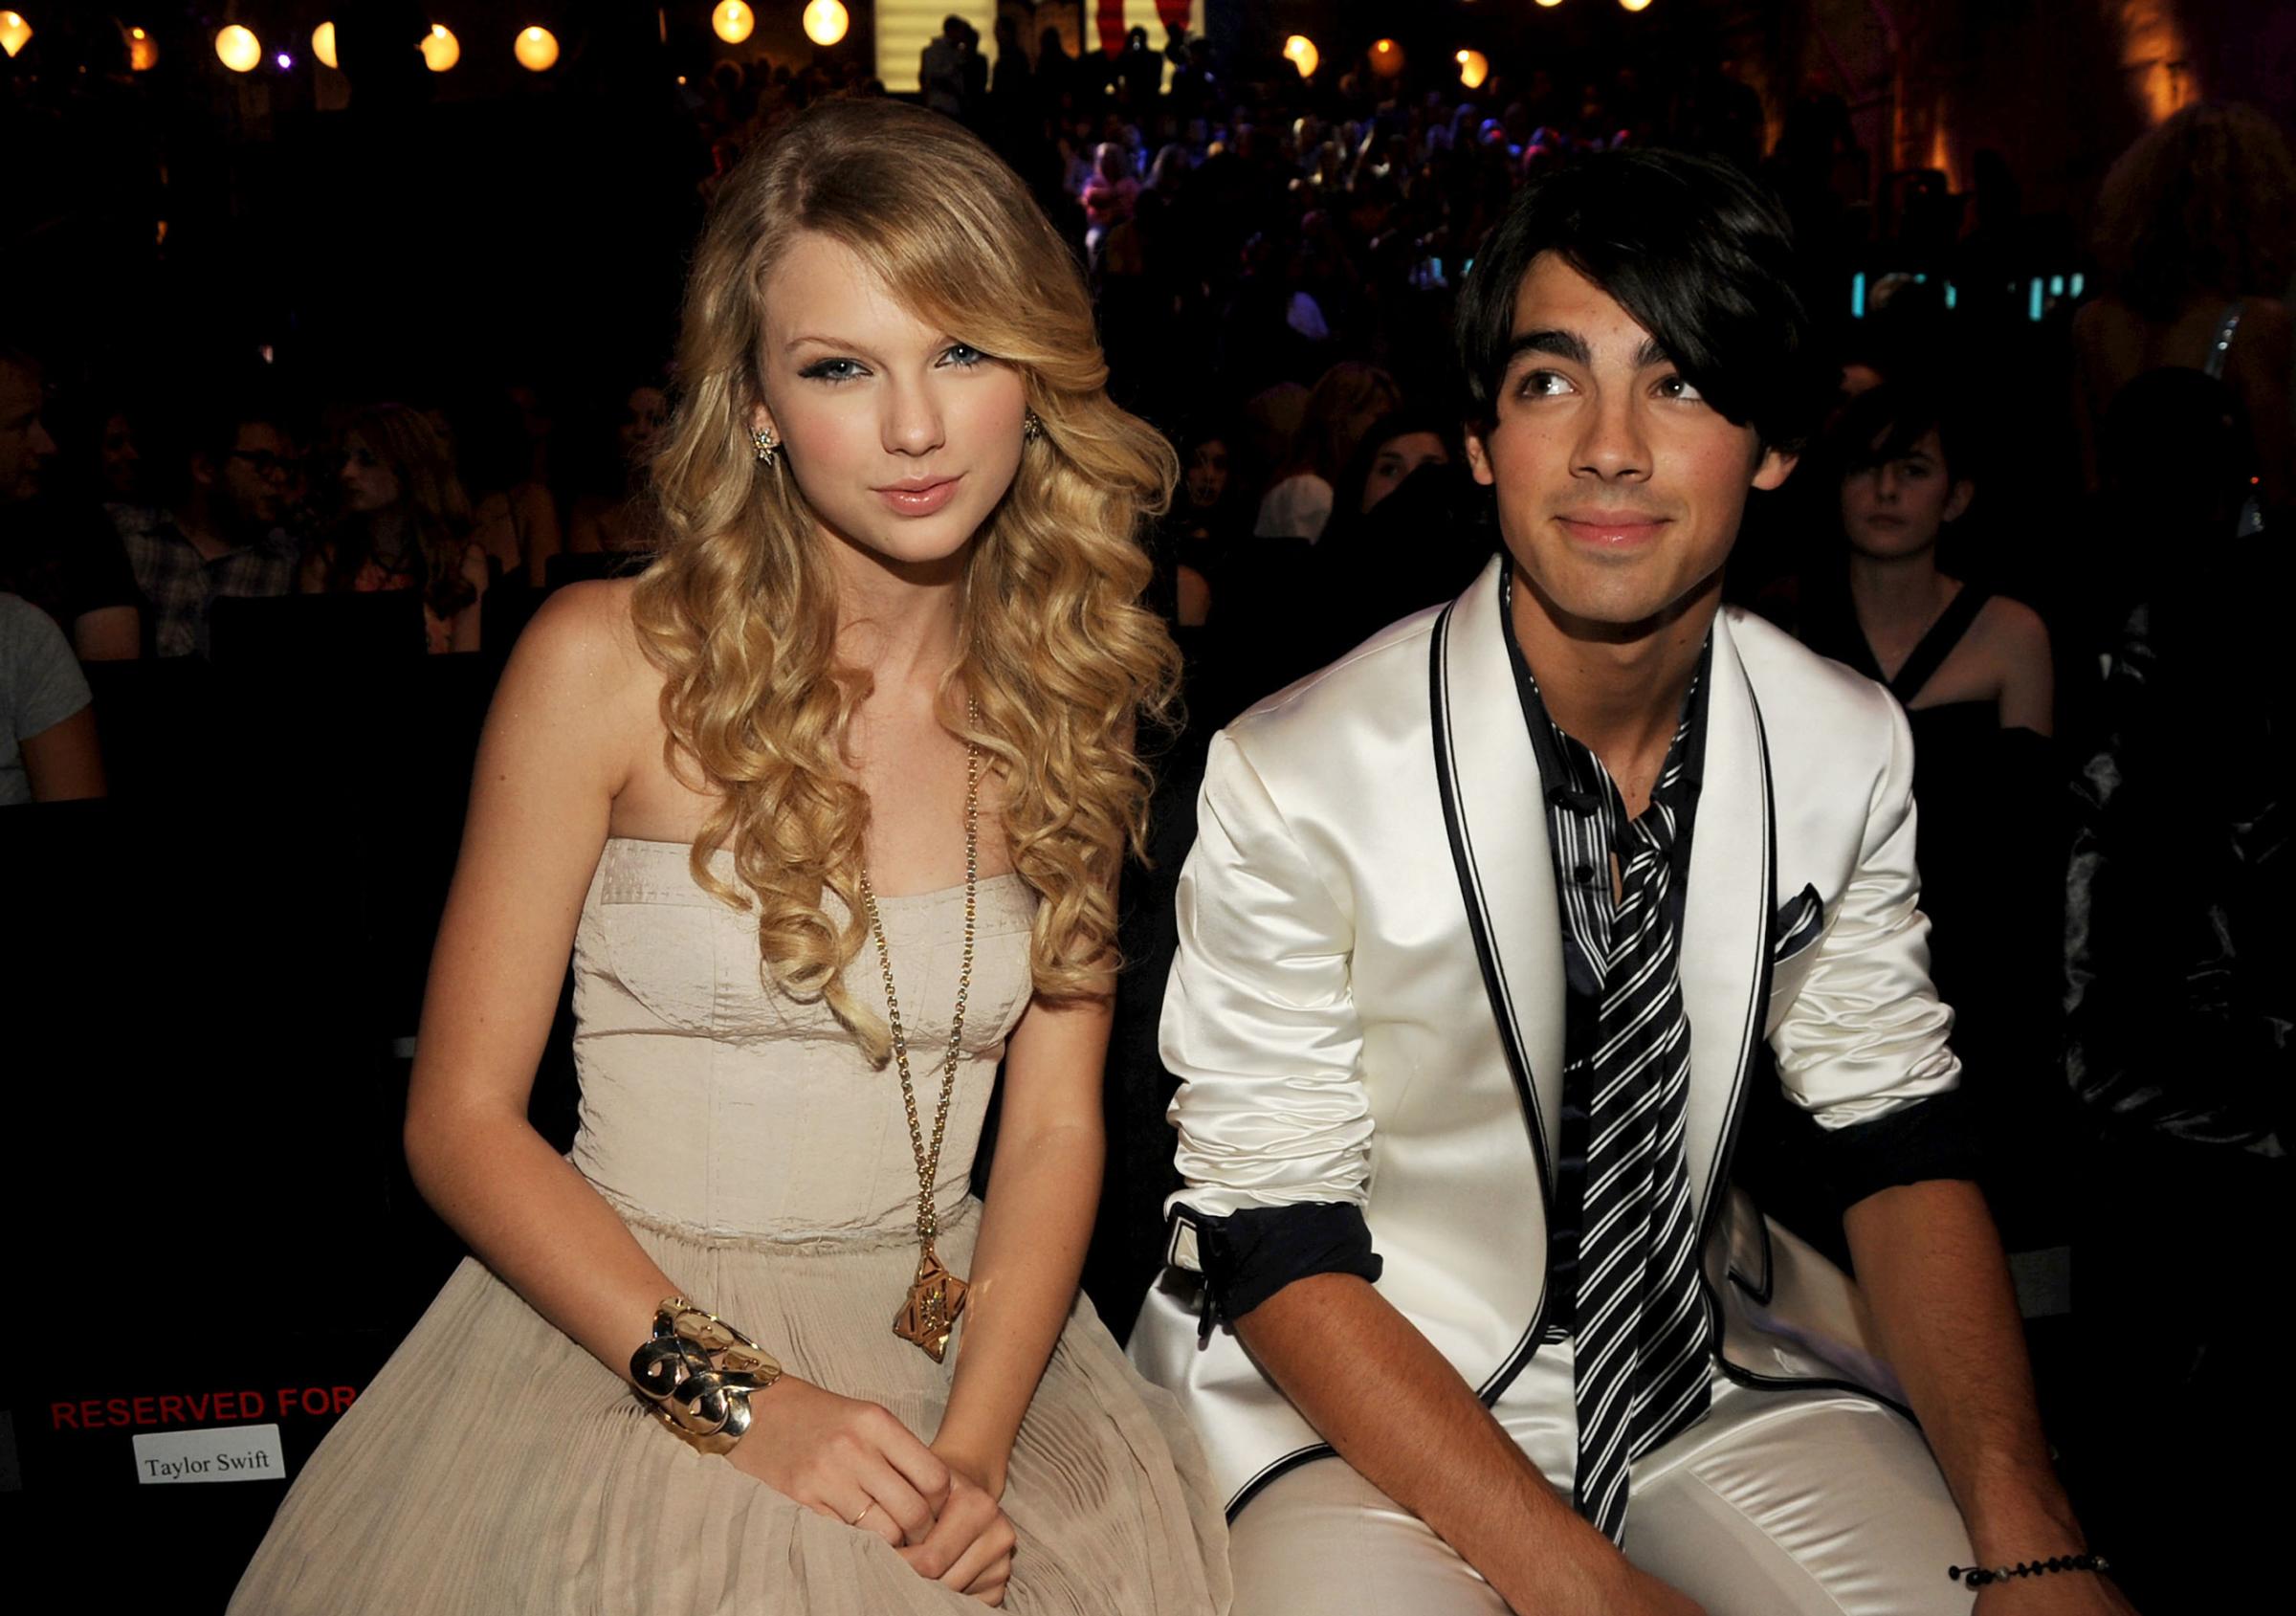 LOS ANGELES, CA - SEPTEMBER 07: Singers Taylor Swift and Joe Jonas at the 2008 MTV Video Music Awards at Paramount Pictures Studios on September 7, 2008 in Los Angeles, California. (Photo by Jeff Kravitz/FilmMagic)